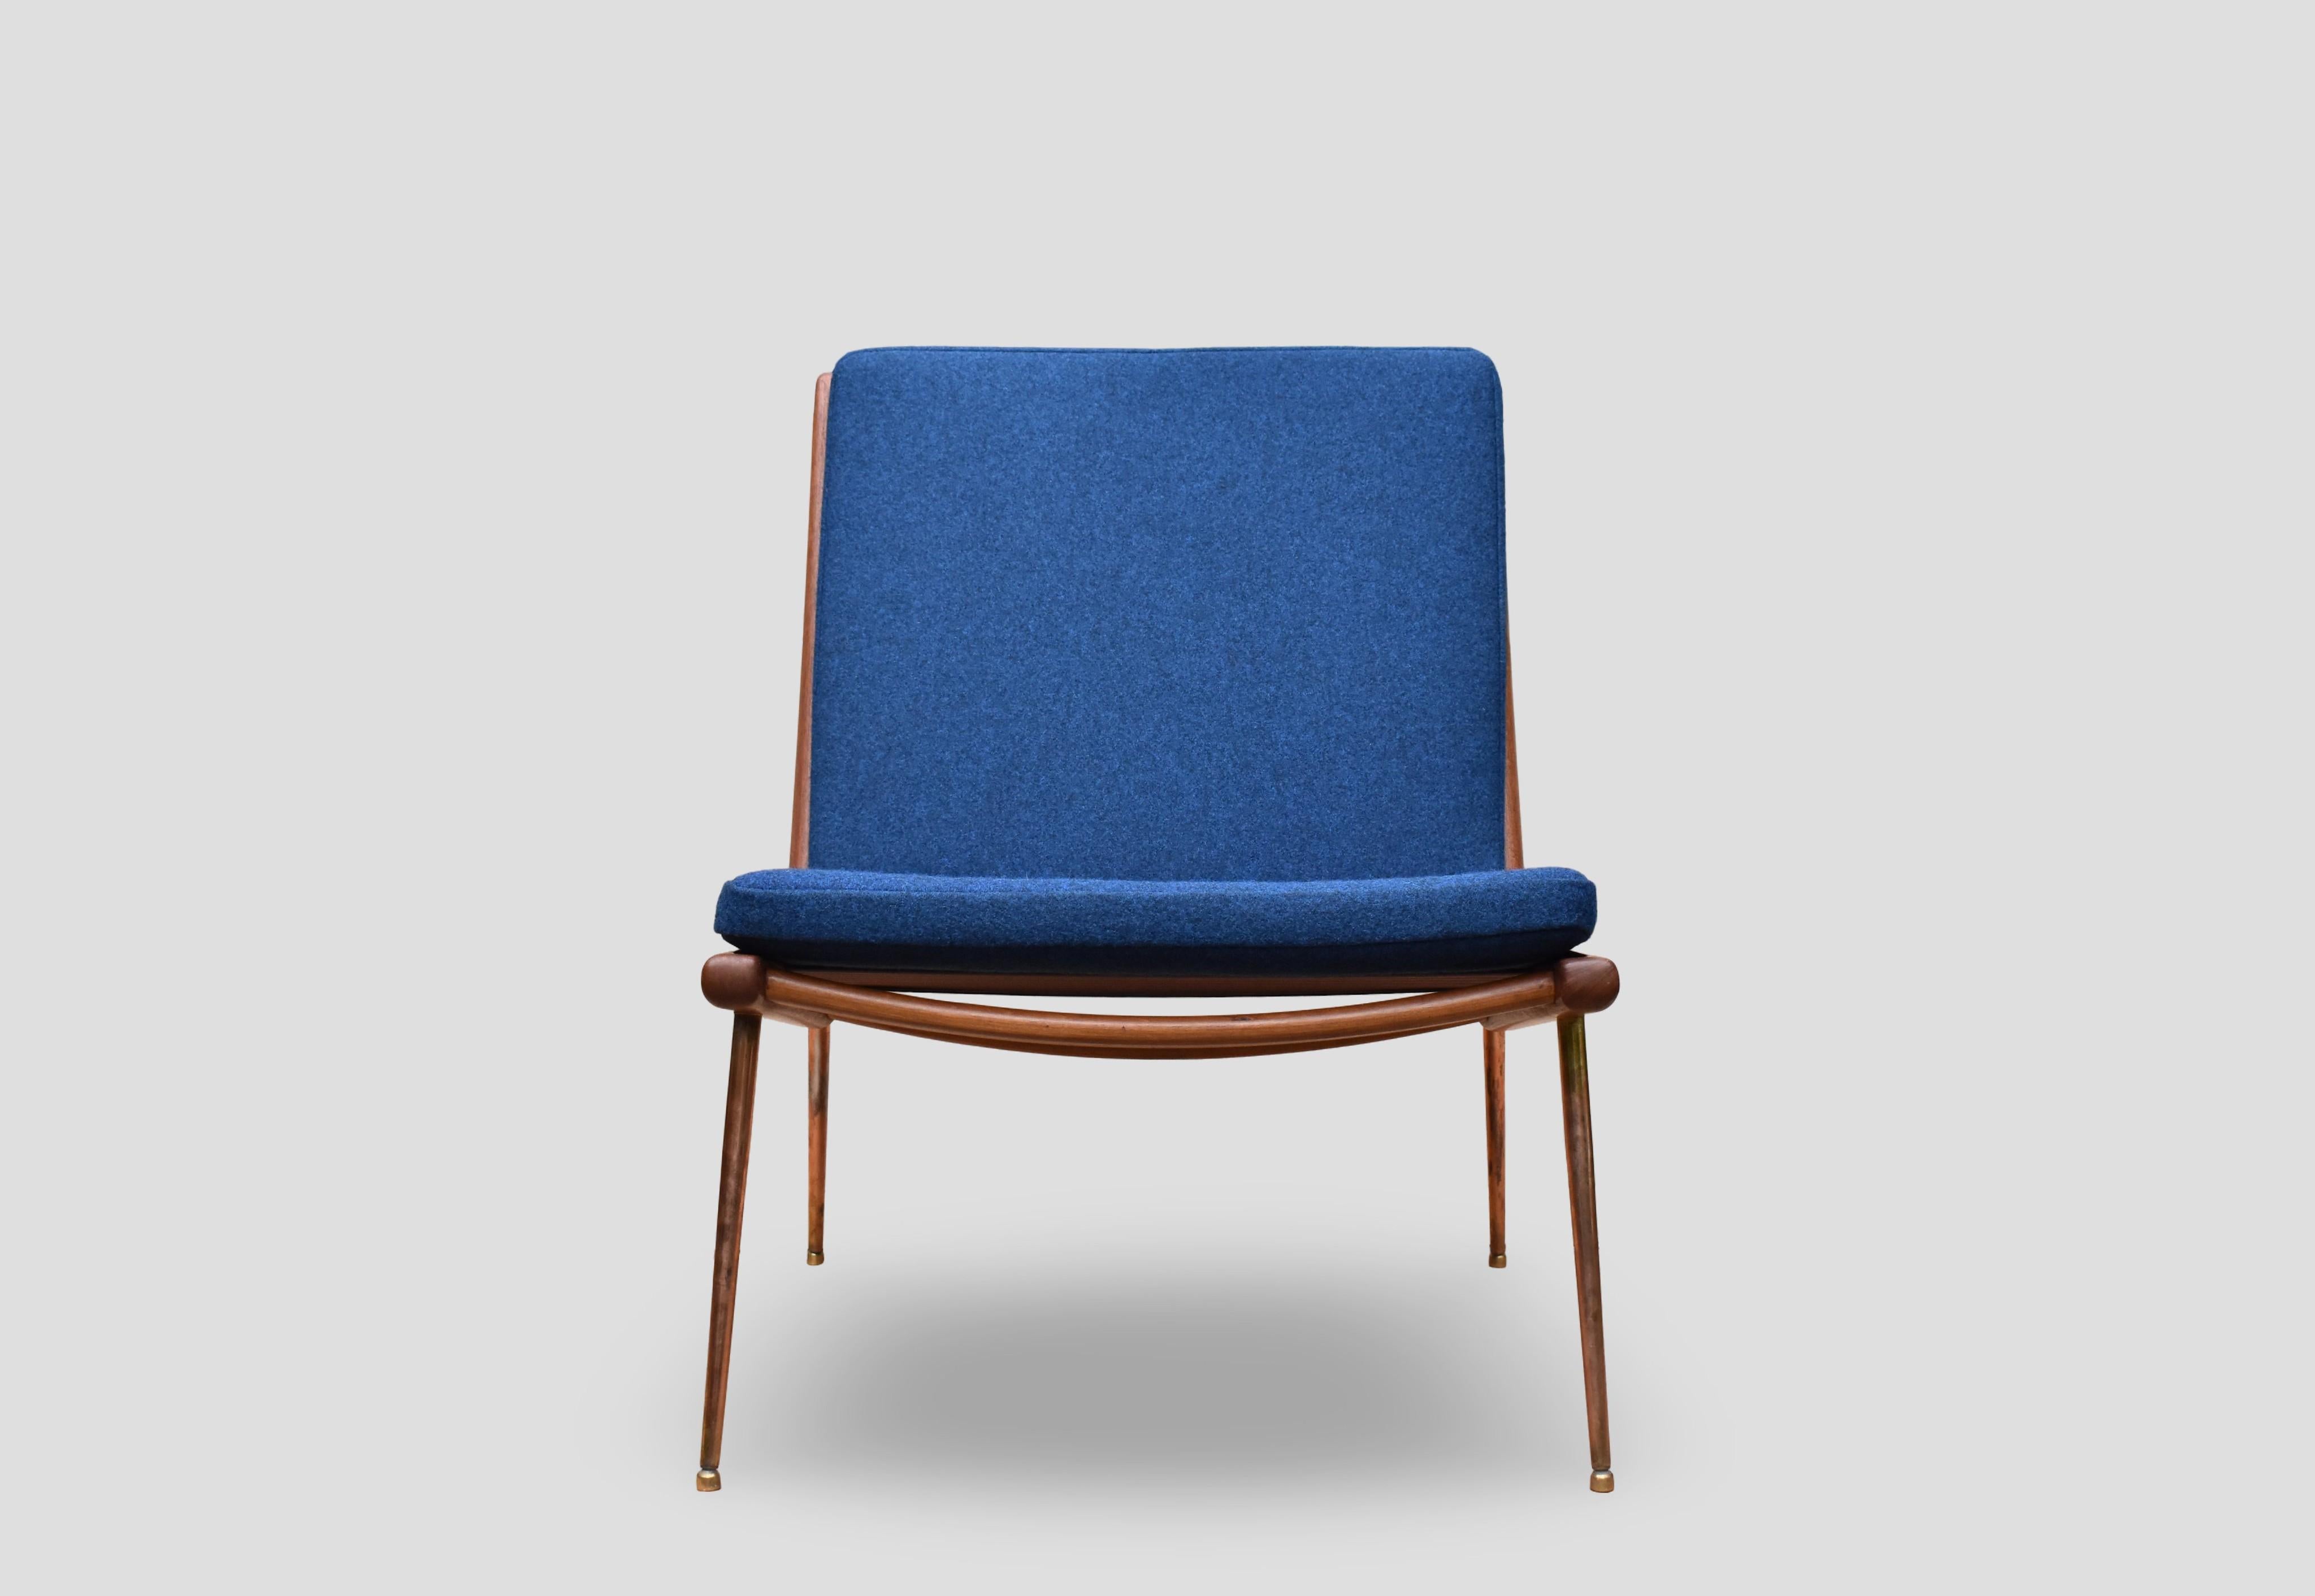 Designed by Architects Peter Hvidt & Orla Molgaard Nielsen in 1954 the Boomerang chair is one of the most elegant chair designs of the Mid Century period.

Often looking more Italian than Danish in origin the beautifully crafted frame stands on slim